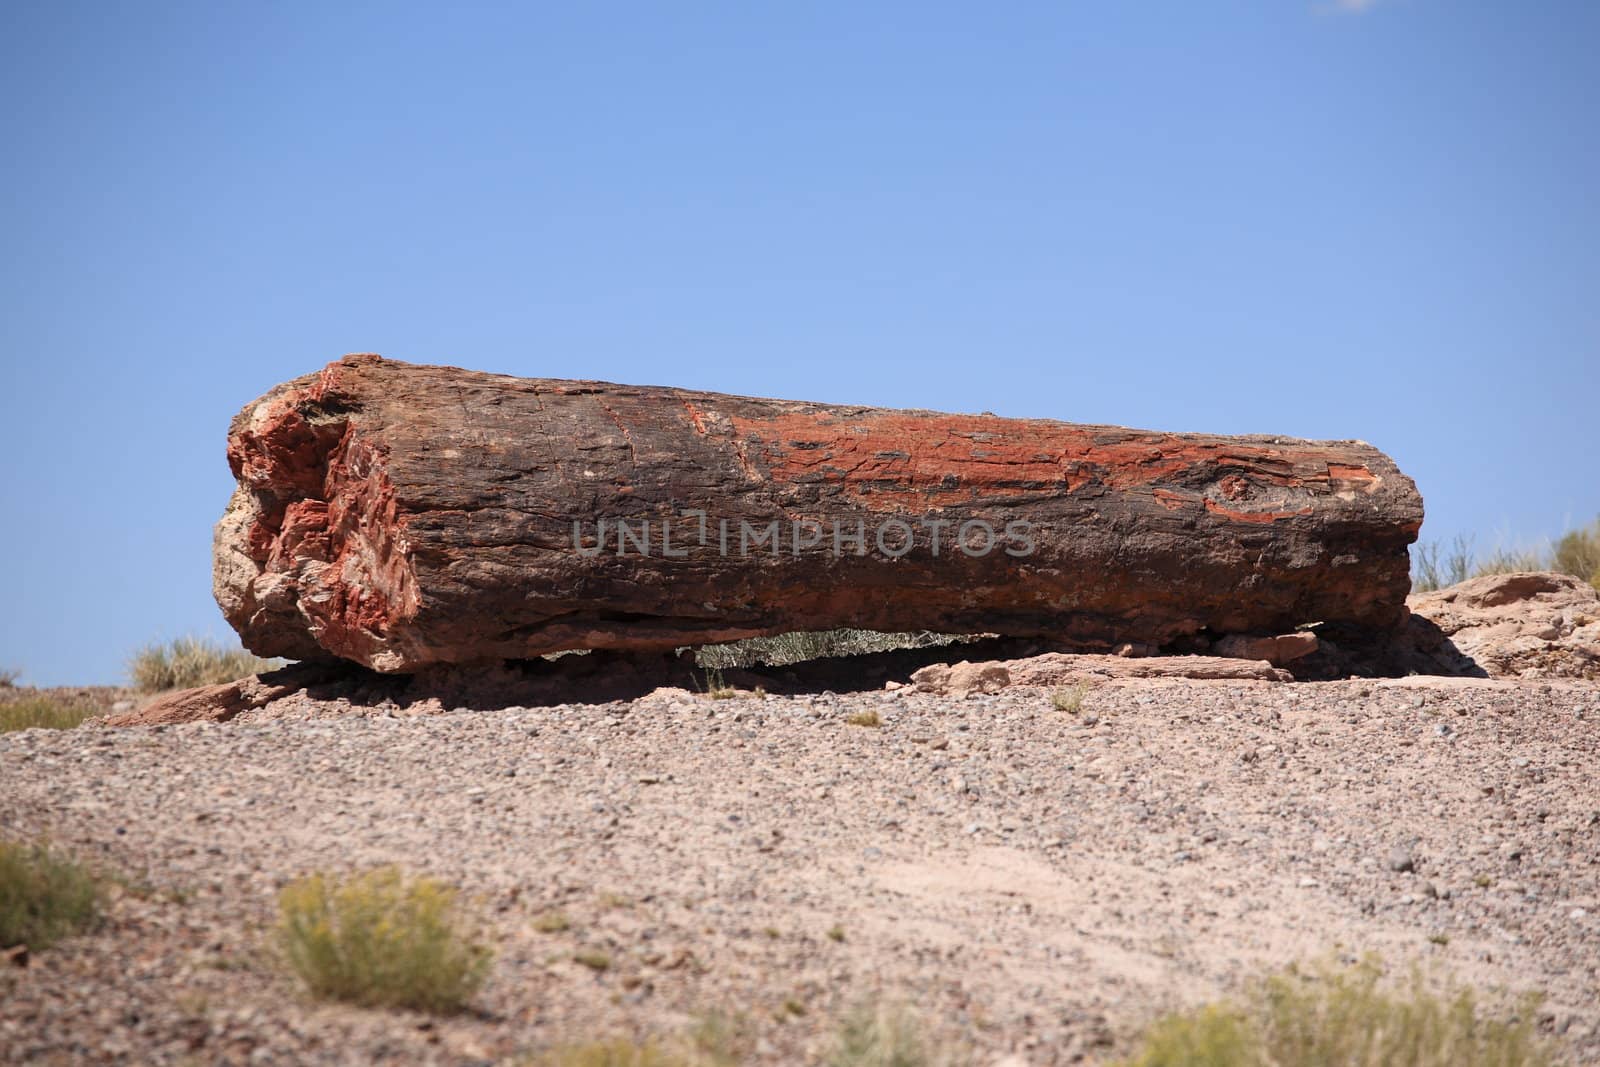 Petrified Wood by Ffooter